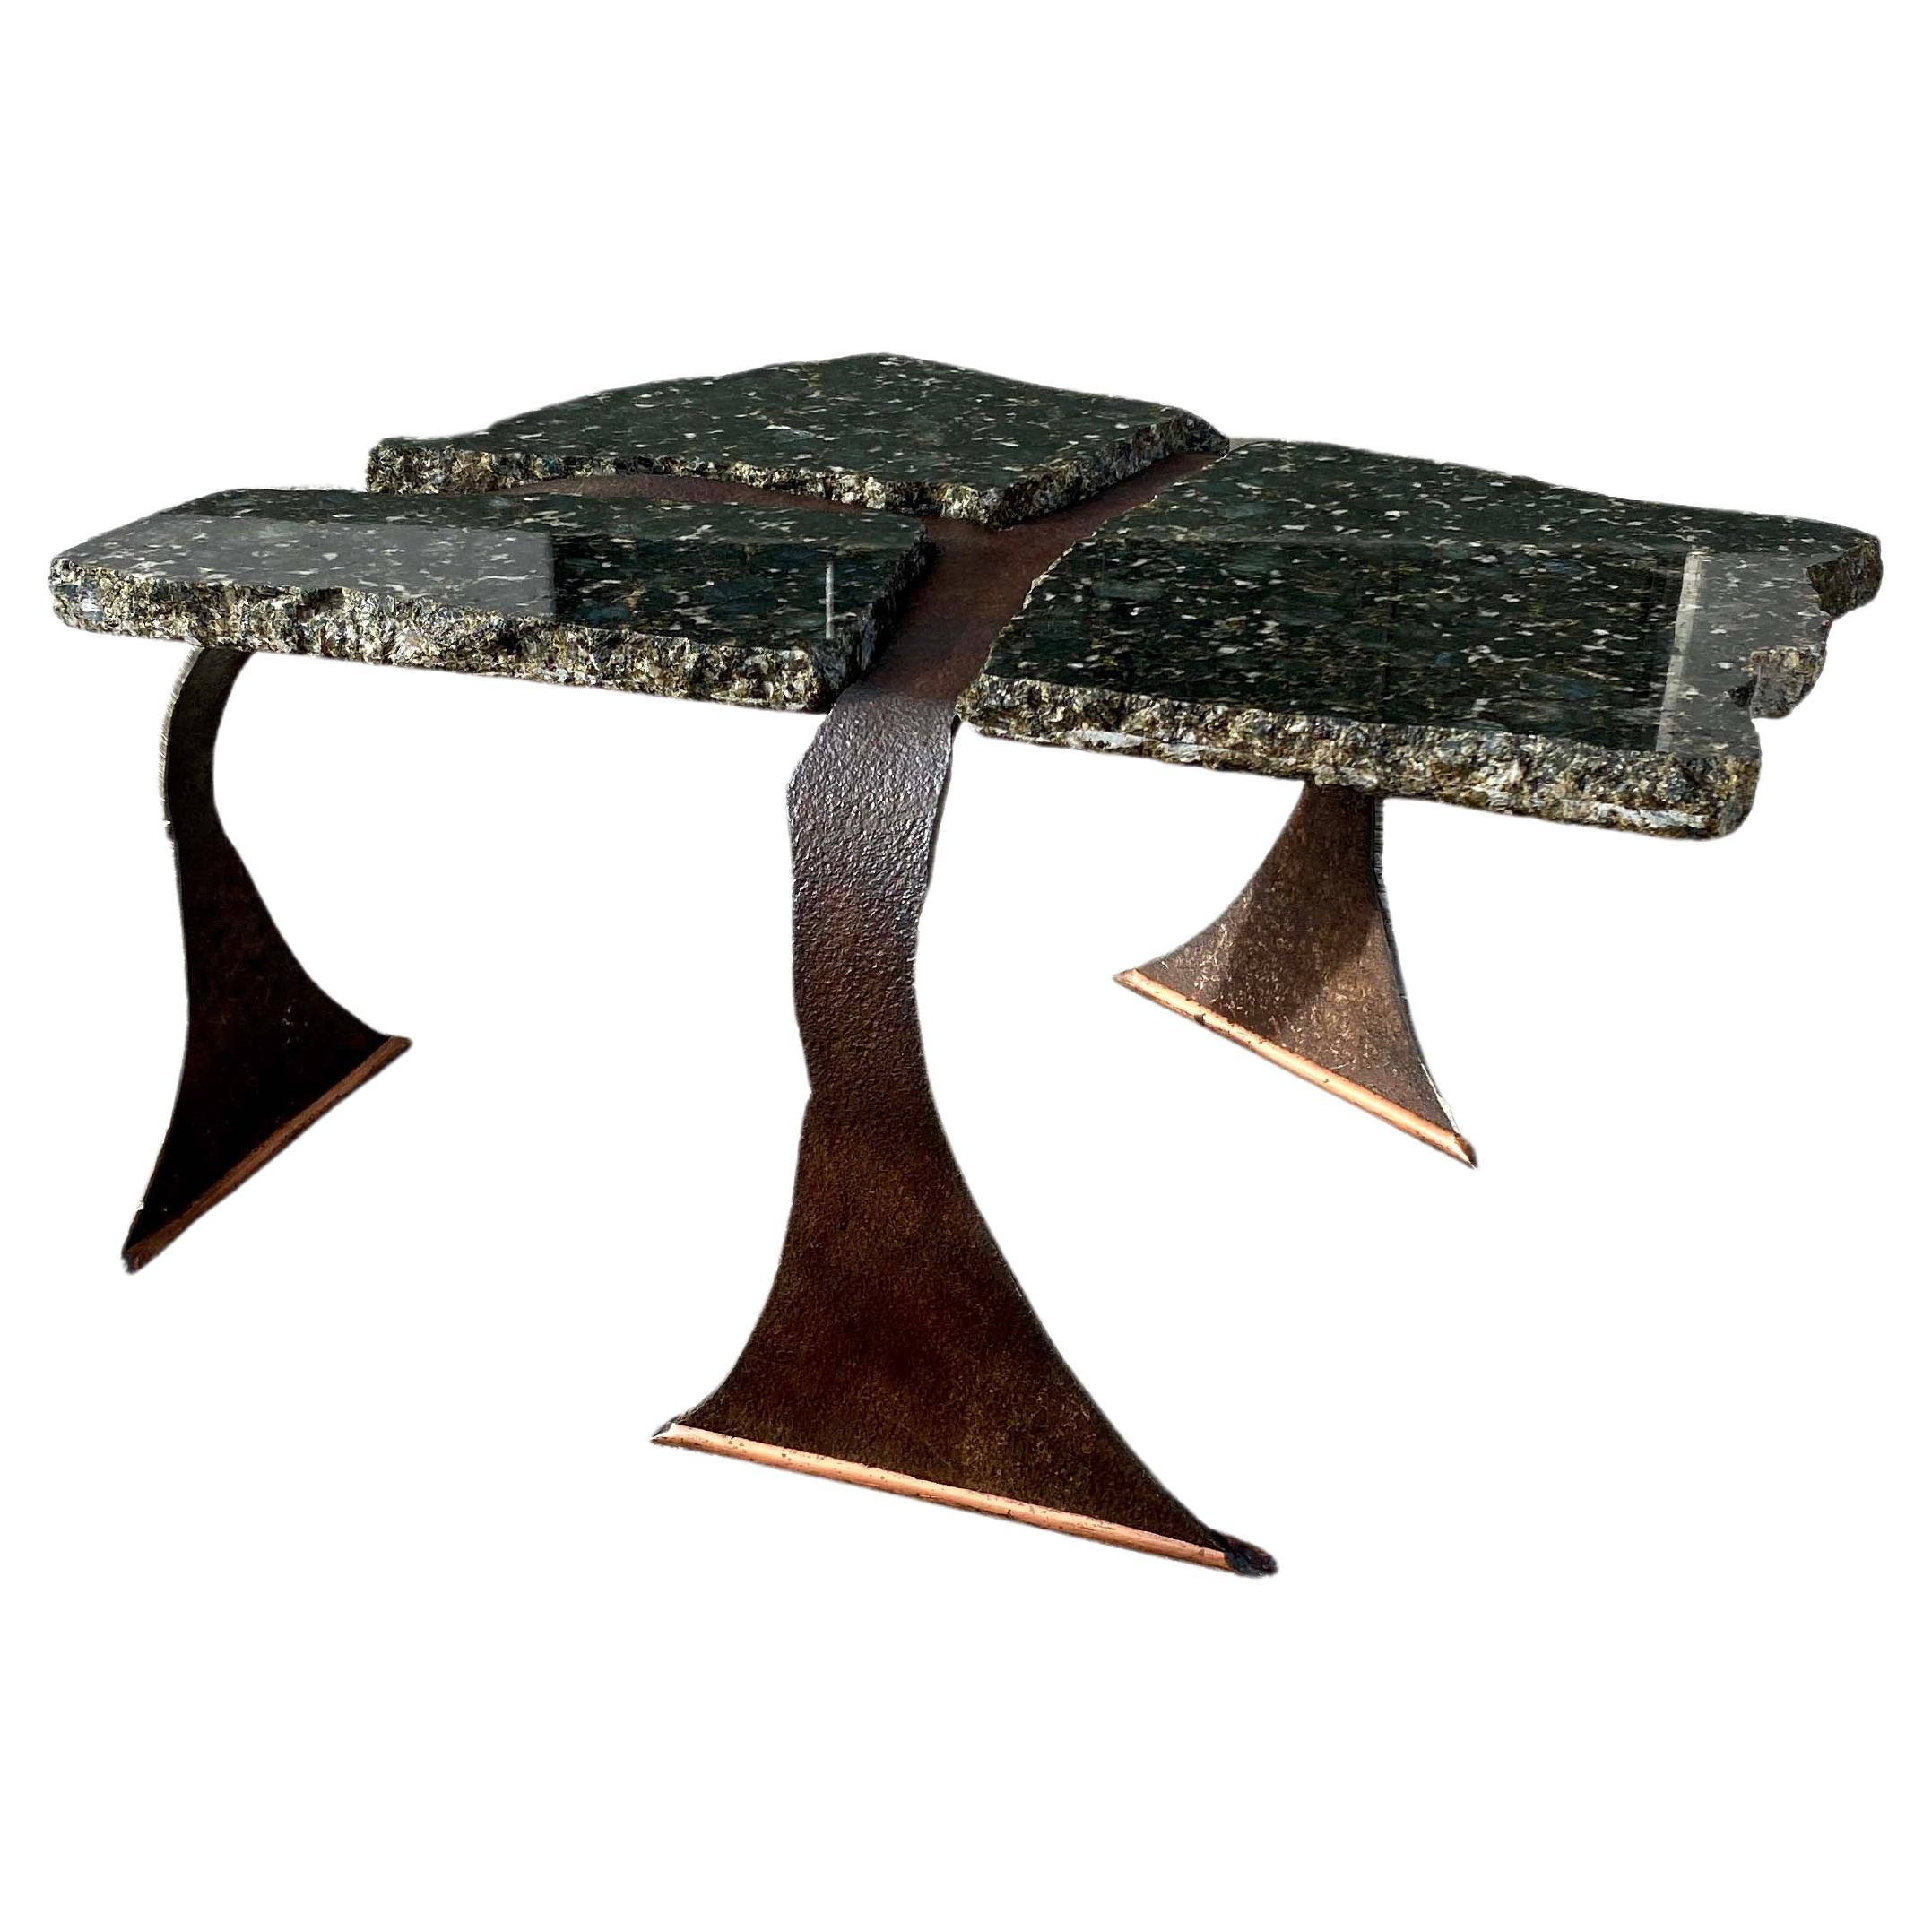 Brutalist Forged Steel and Granite Artist Coffee Table For Sale